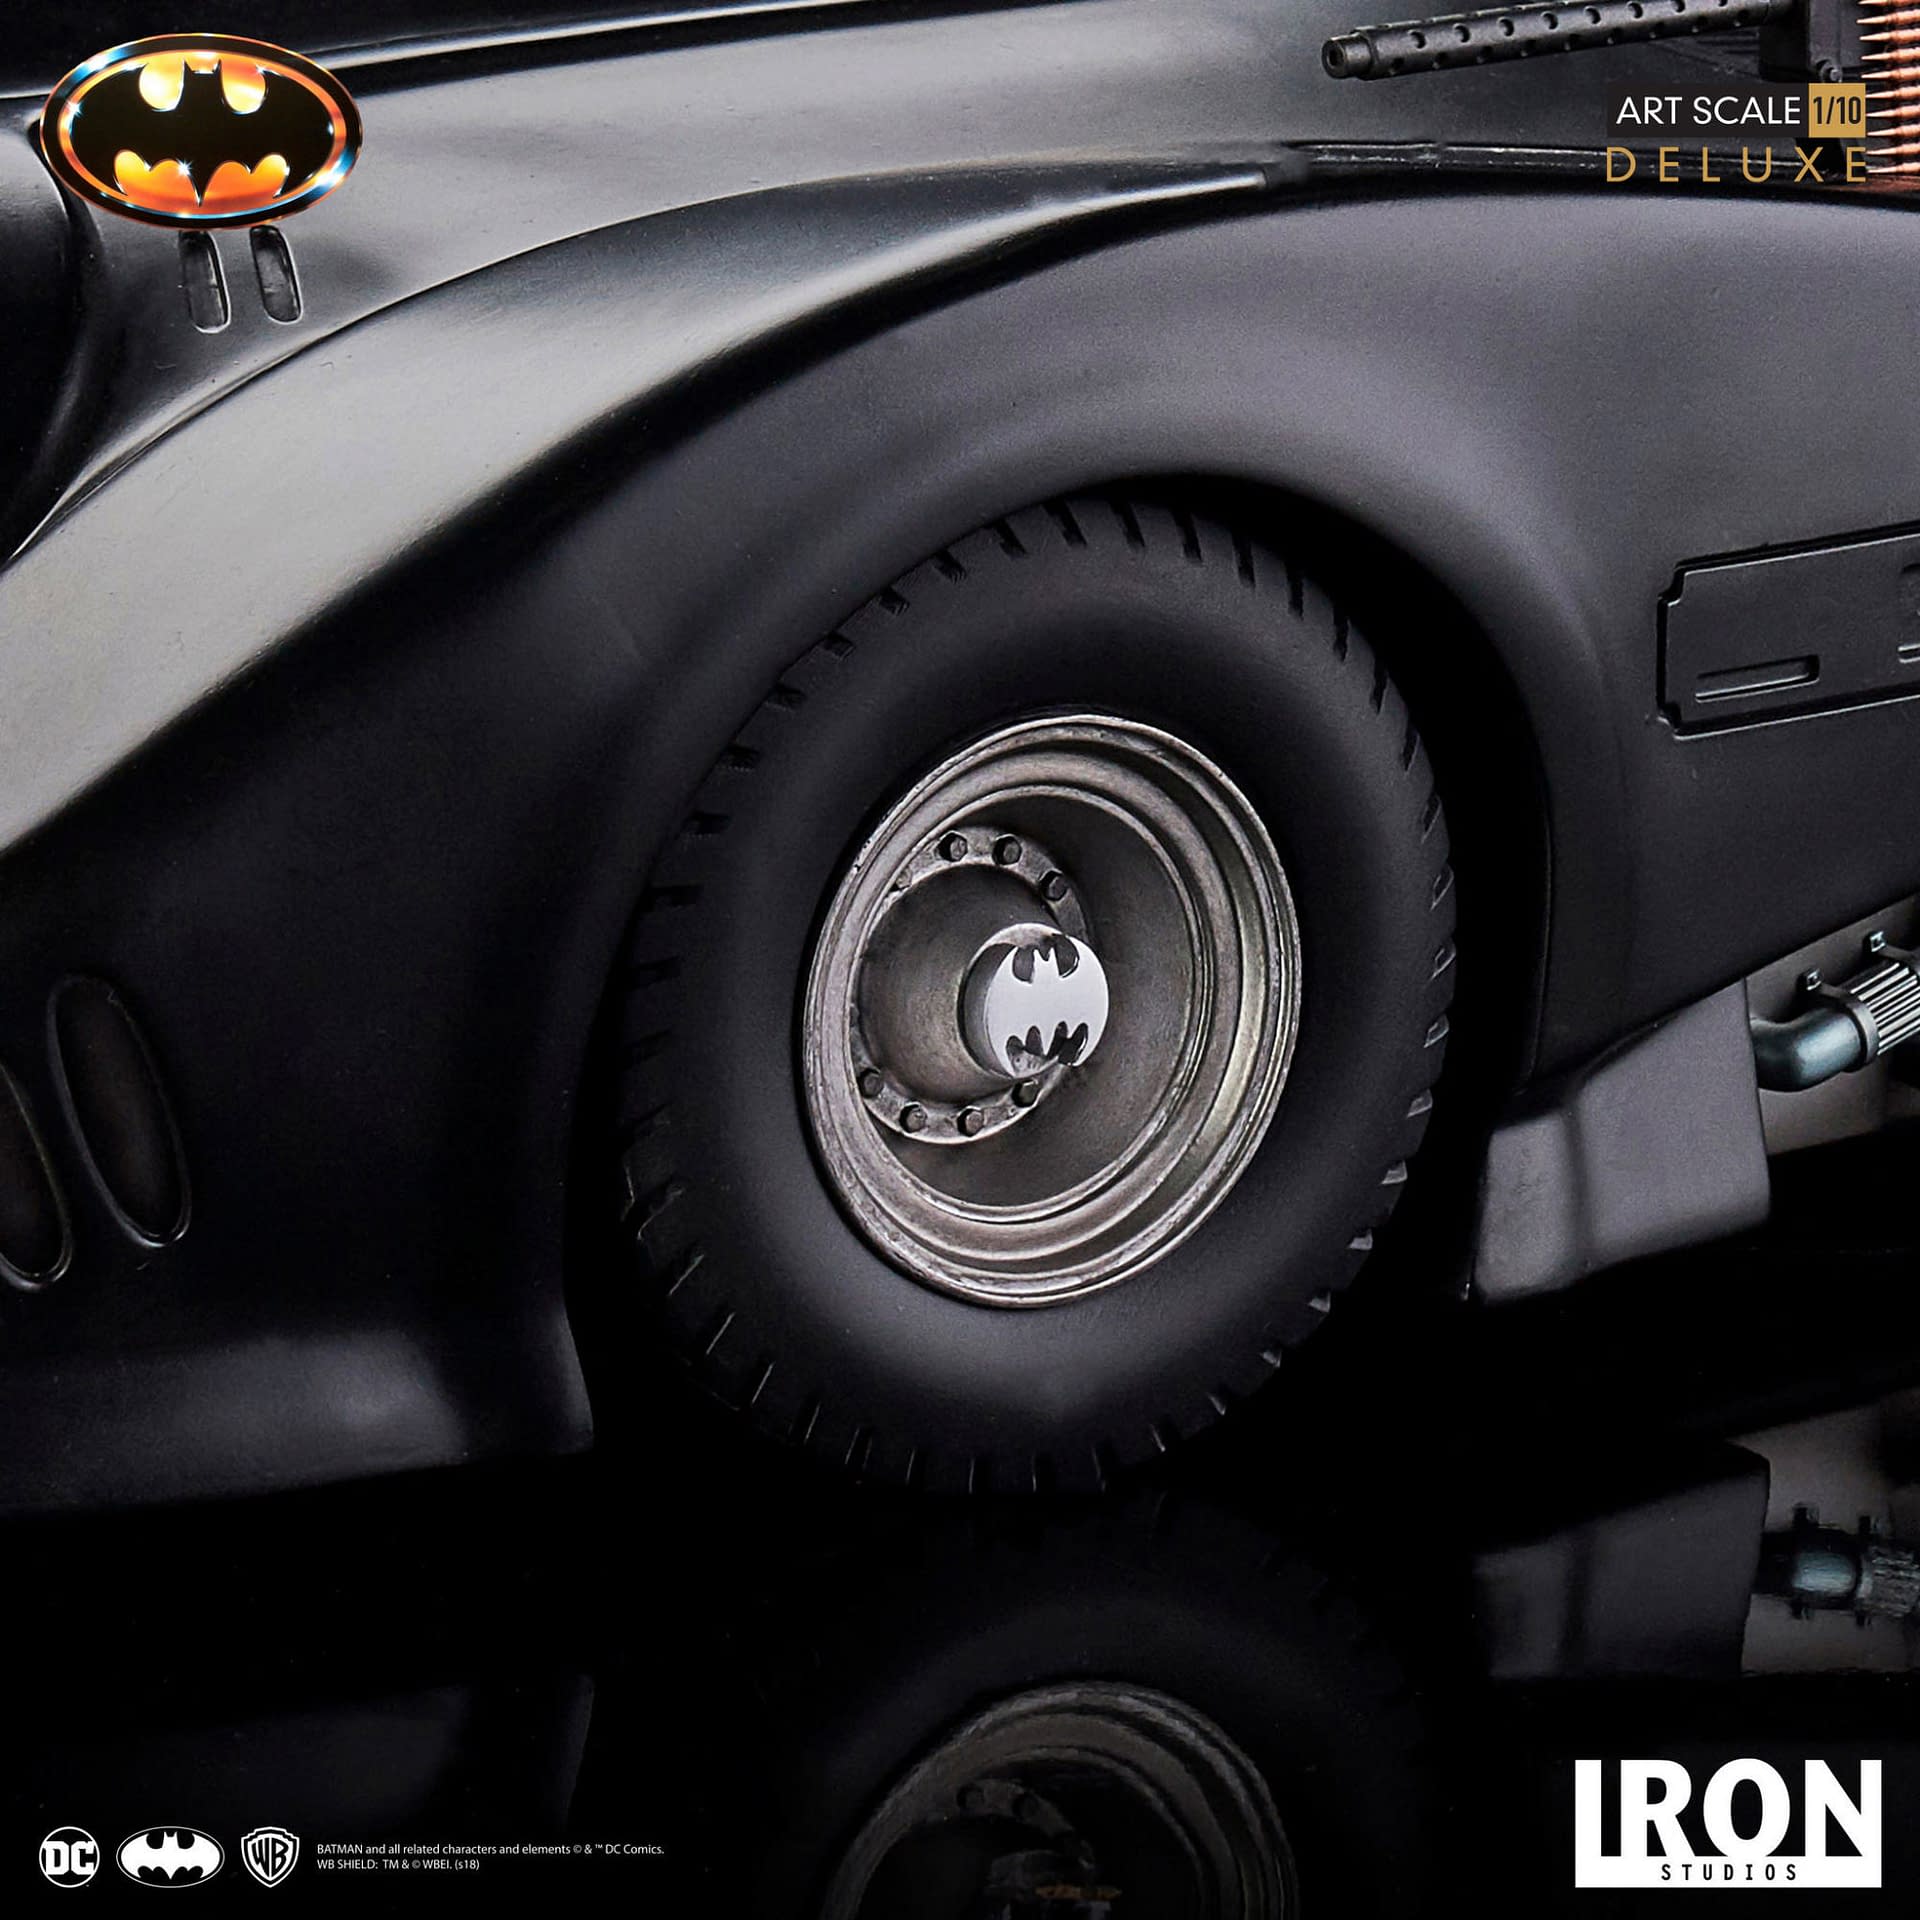 "Batmobile 89" Hits the Streets Again With New Iron Studios Art Scale